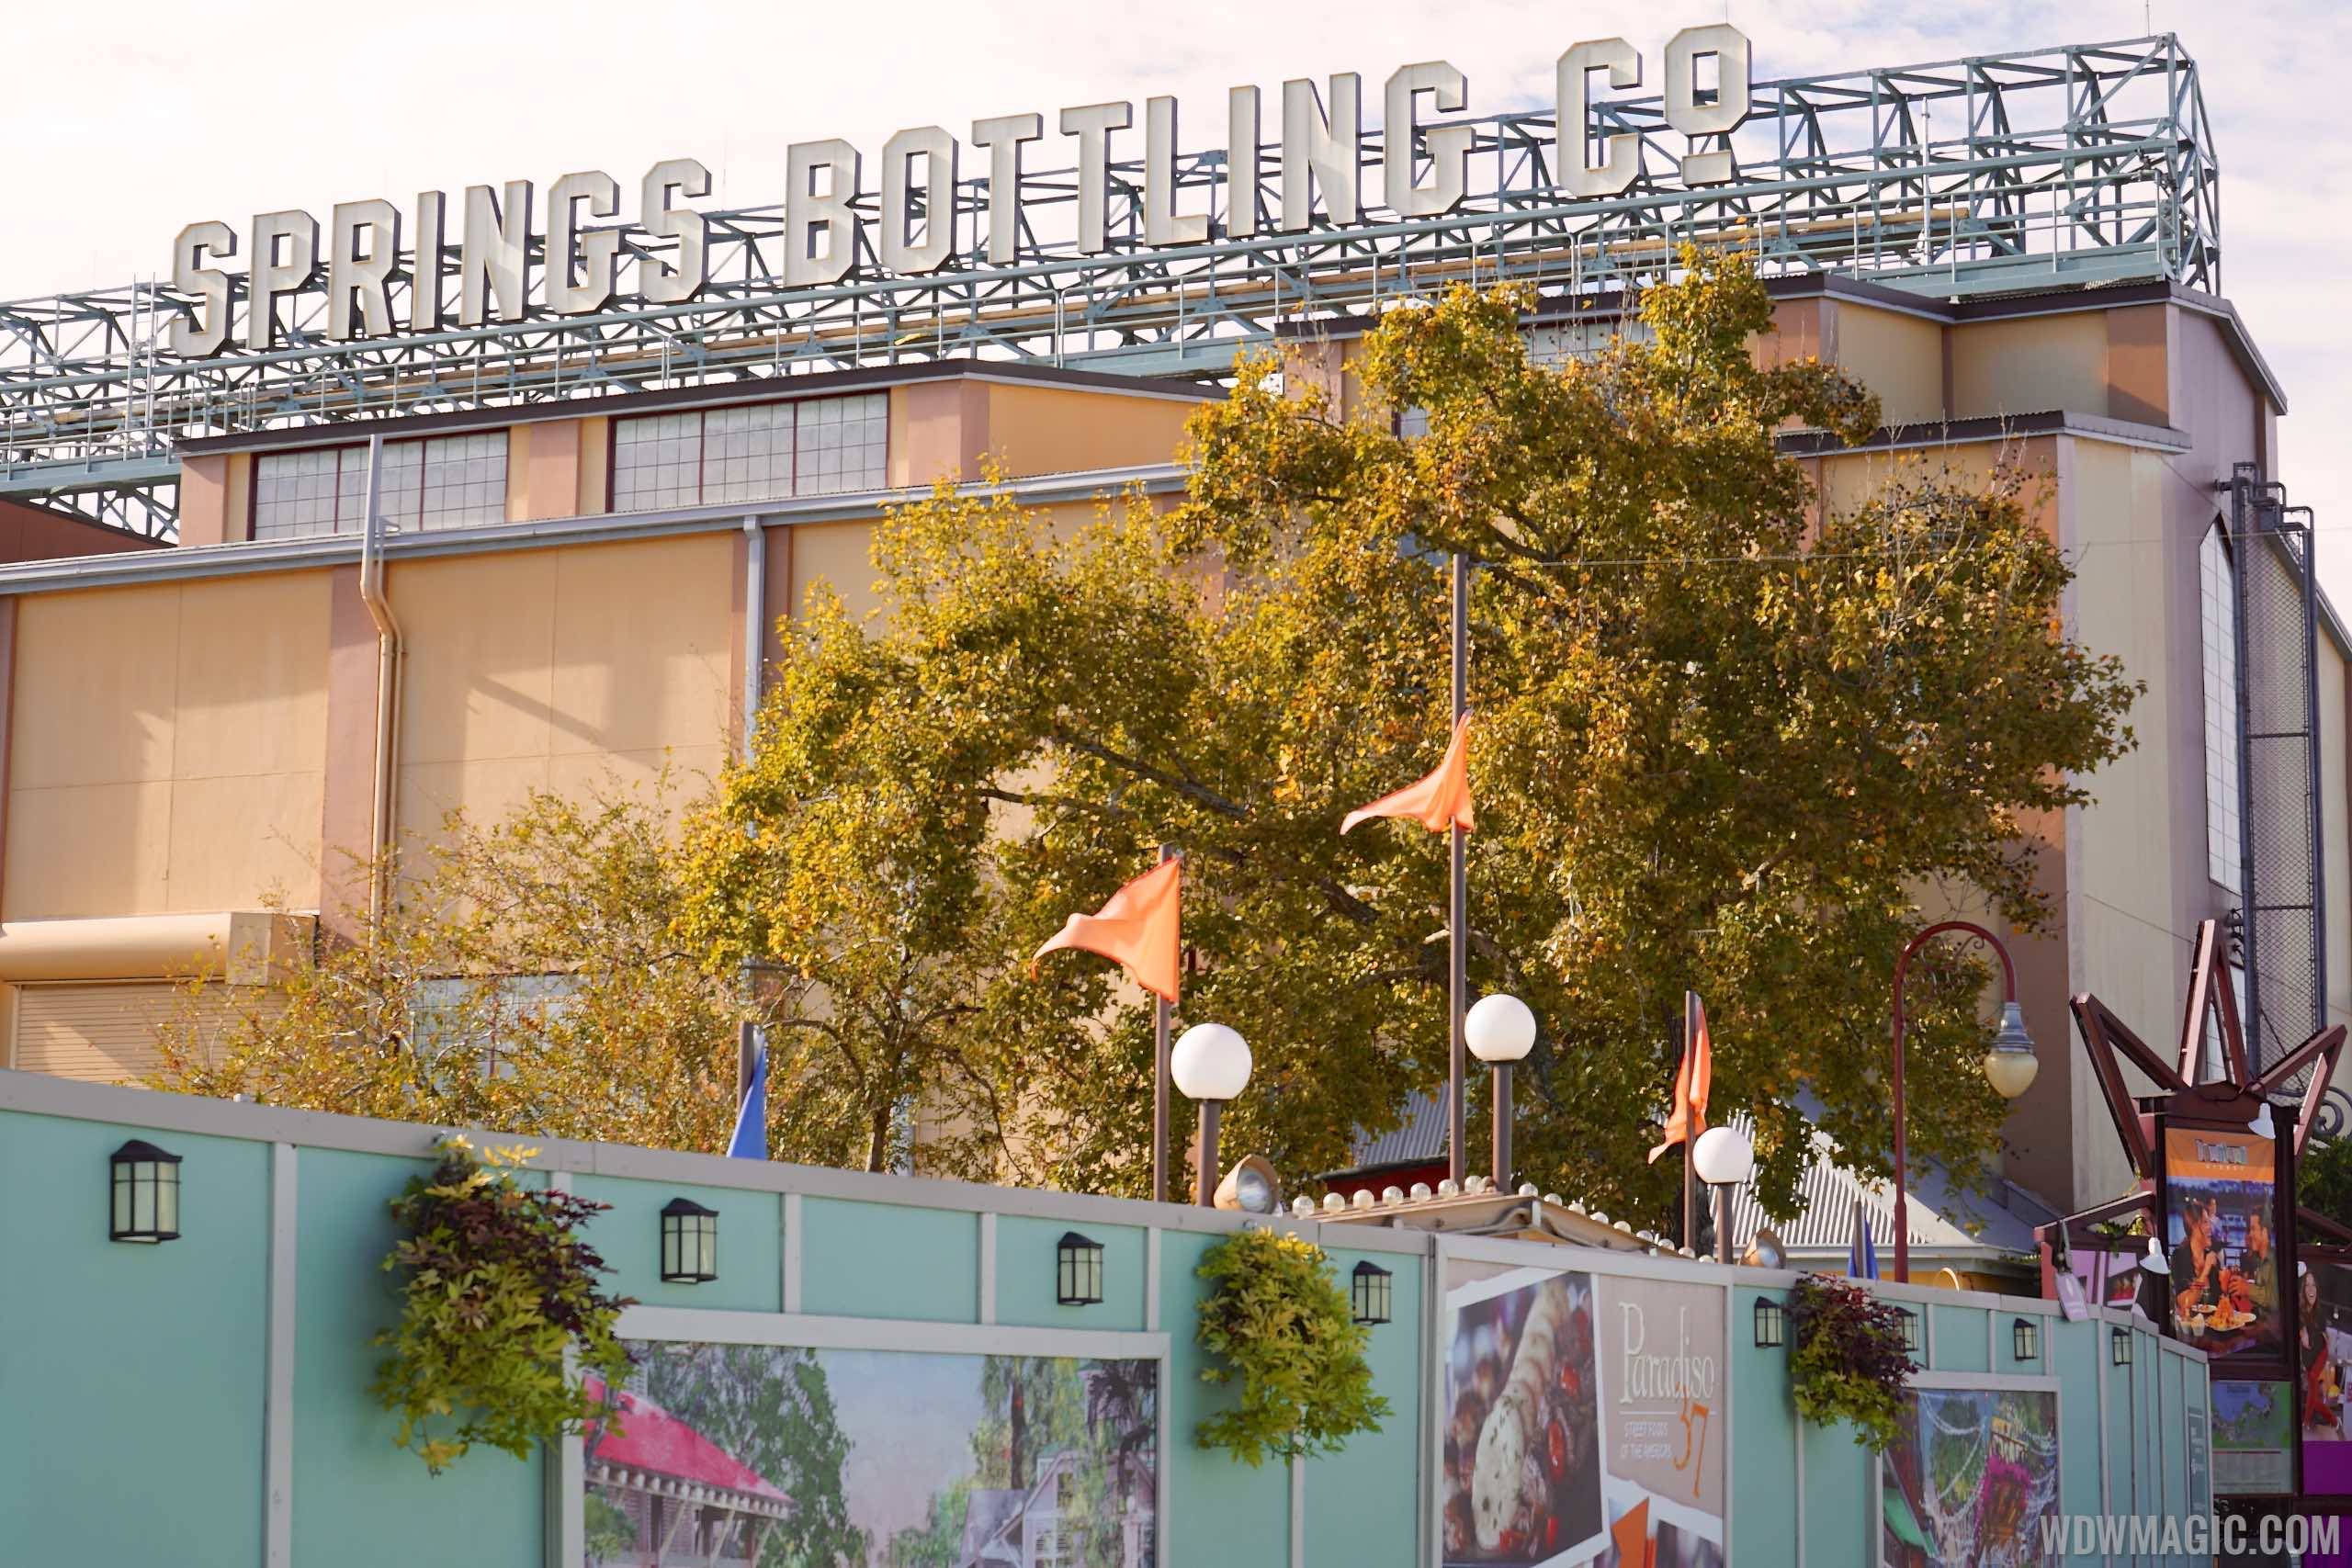 PHOTOS - Springs Bottling Co signage now up at Disney Springs